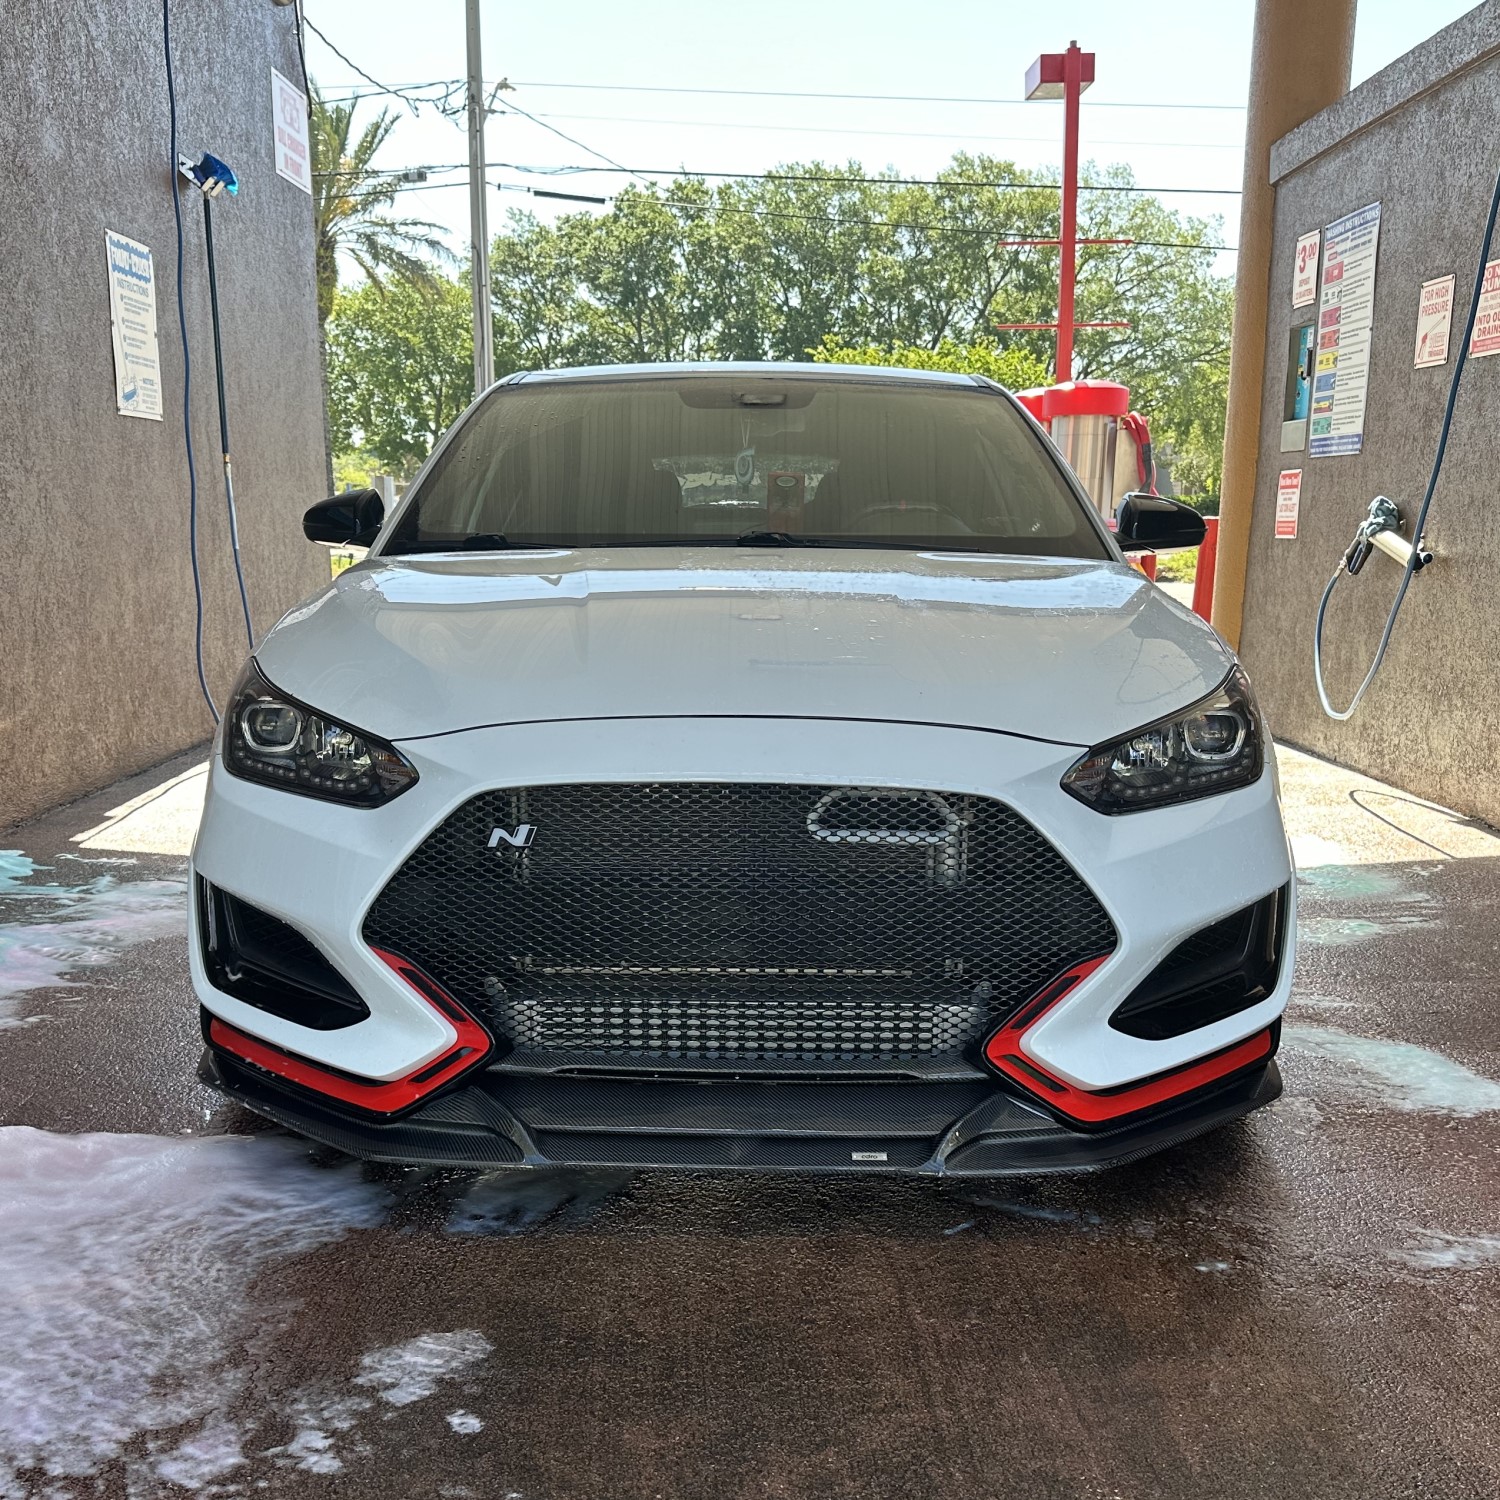 Washed and Ready for the Road - Hitting the Pavement with a New Grille